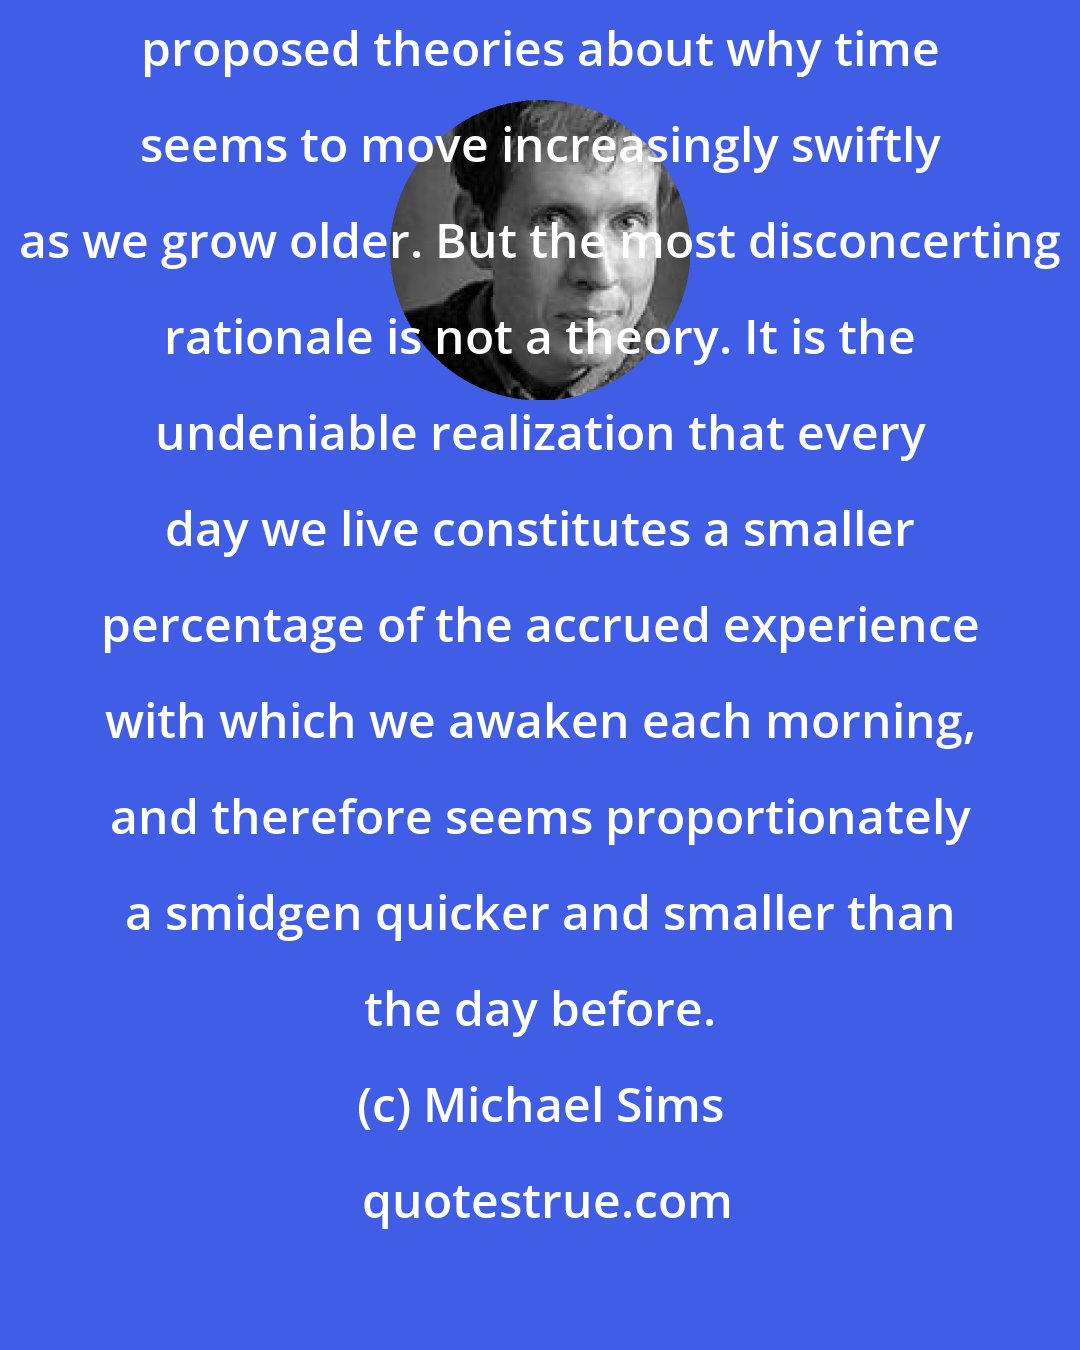 Michael Sims: Philosophers, comedians, and tipsy birthday celebrants all have proposed theories about why time seems to move increasingly swiftly as we grow older. But the most disconcerting rationale is not a theory. It is the undeniable realization that every day we live constitutes a smaller percentage of the accrued experience with which we awaken each morning, and therefore seems proportionately a smidgen quicker and smaller than the day before.